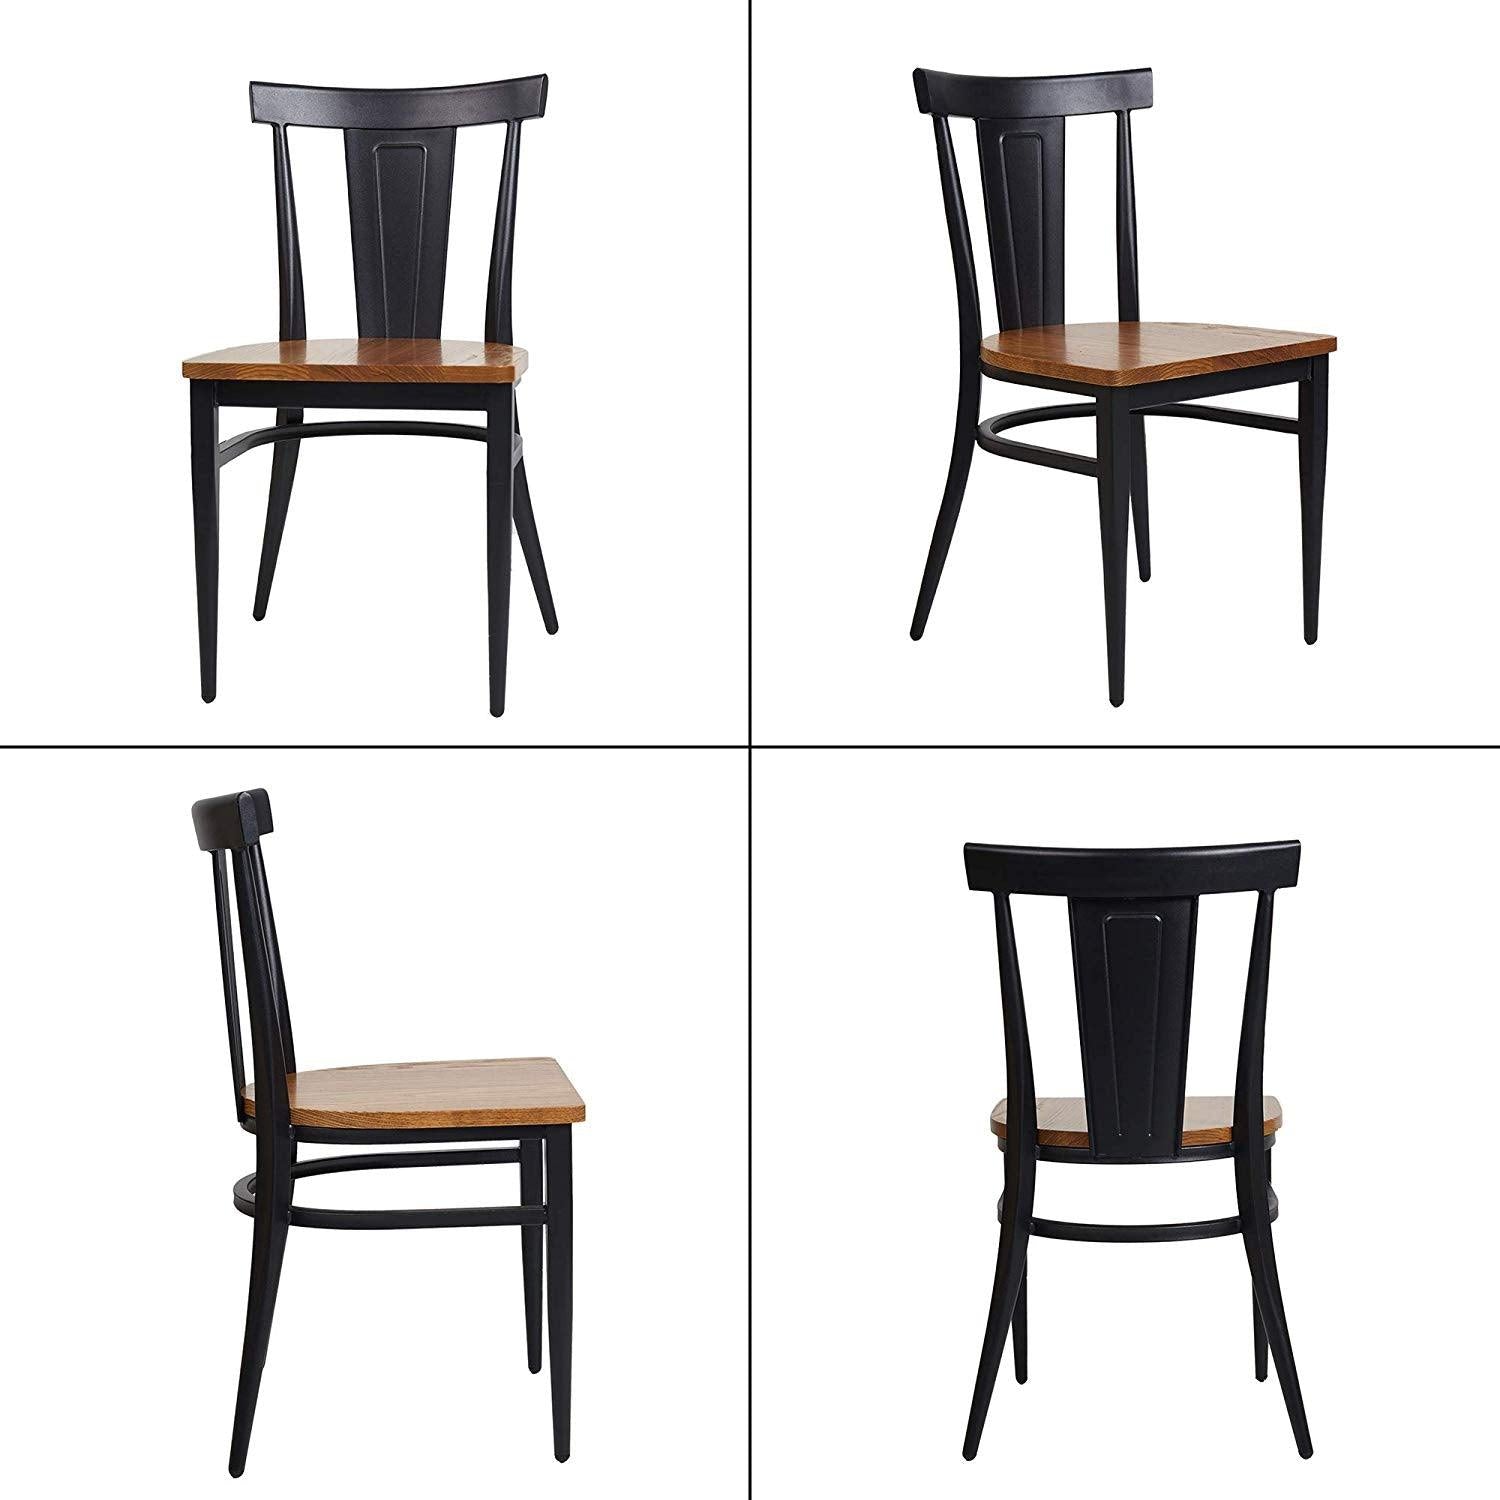 Bosonshop Dining Room Side Chair Set of 2 Wood Kitchen Chairs with Metal Legs